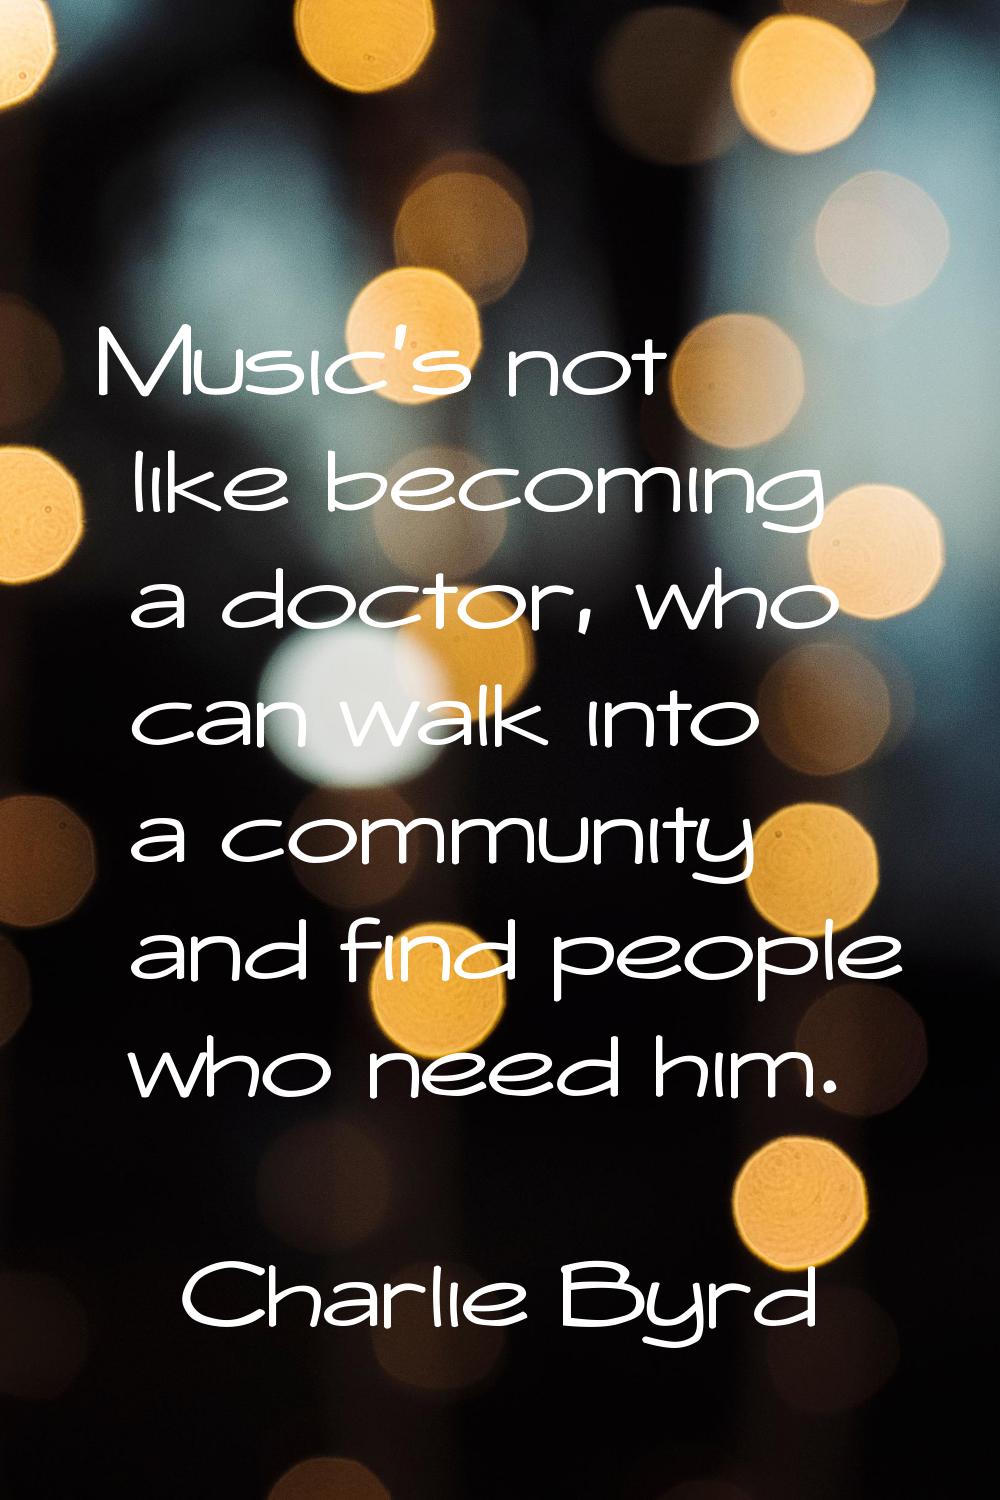 Music's not like becoming a doctor, who can walk into a community and find people who need him.